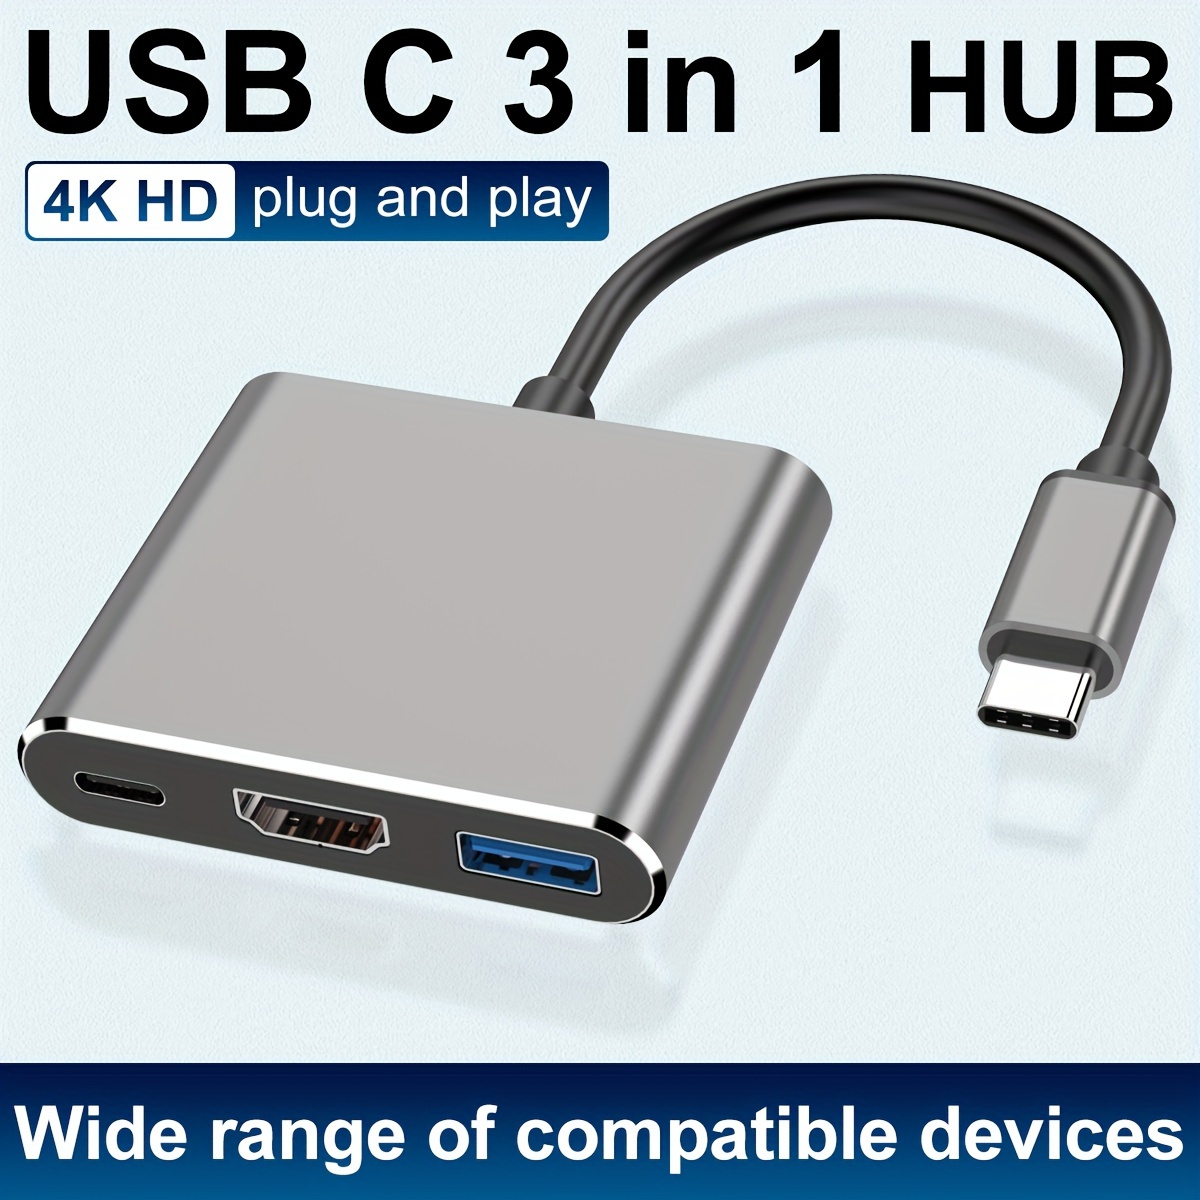 USB C Hub Multiport Adapter - 10 in 1 Portable Dongle with 4K HDMI, VGA,  Ethernet, 3 USB Ports, Audio, PD Charger, SD/Micro SD Card Reader  Compatible for MacBook Pro, XPS More